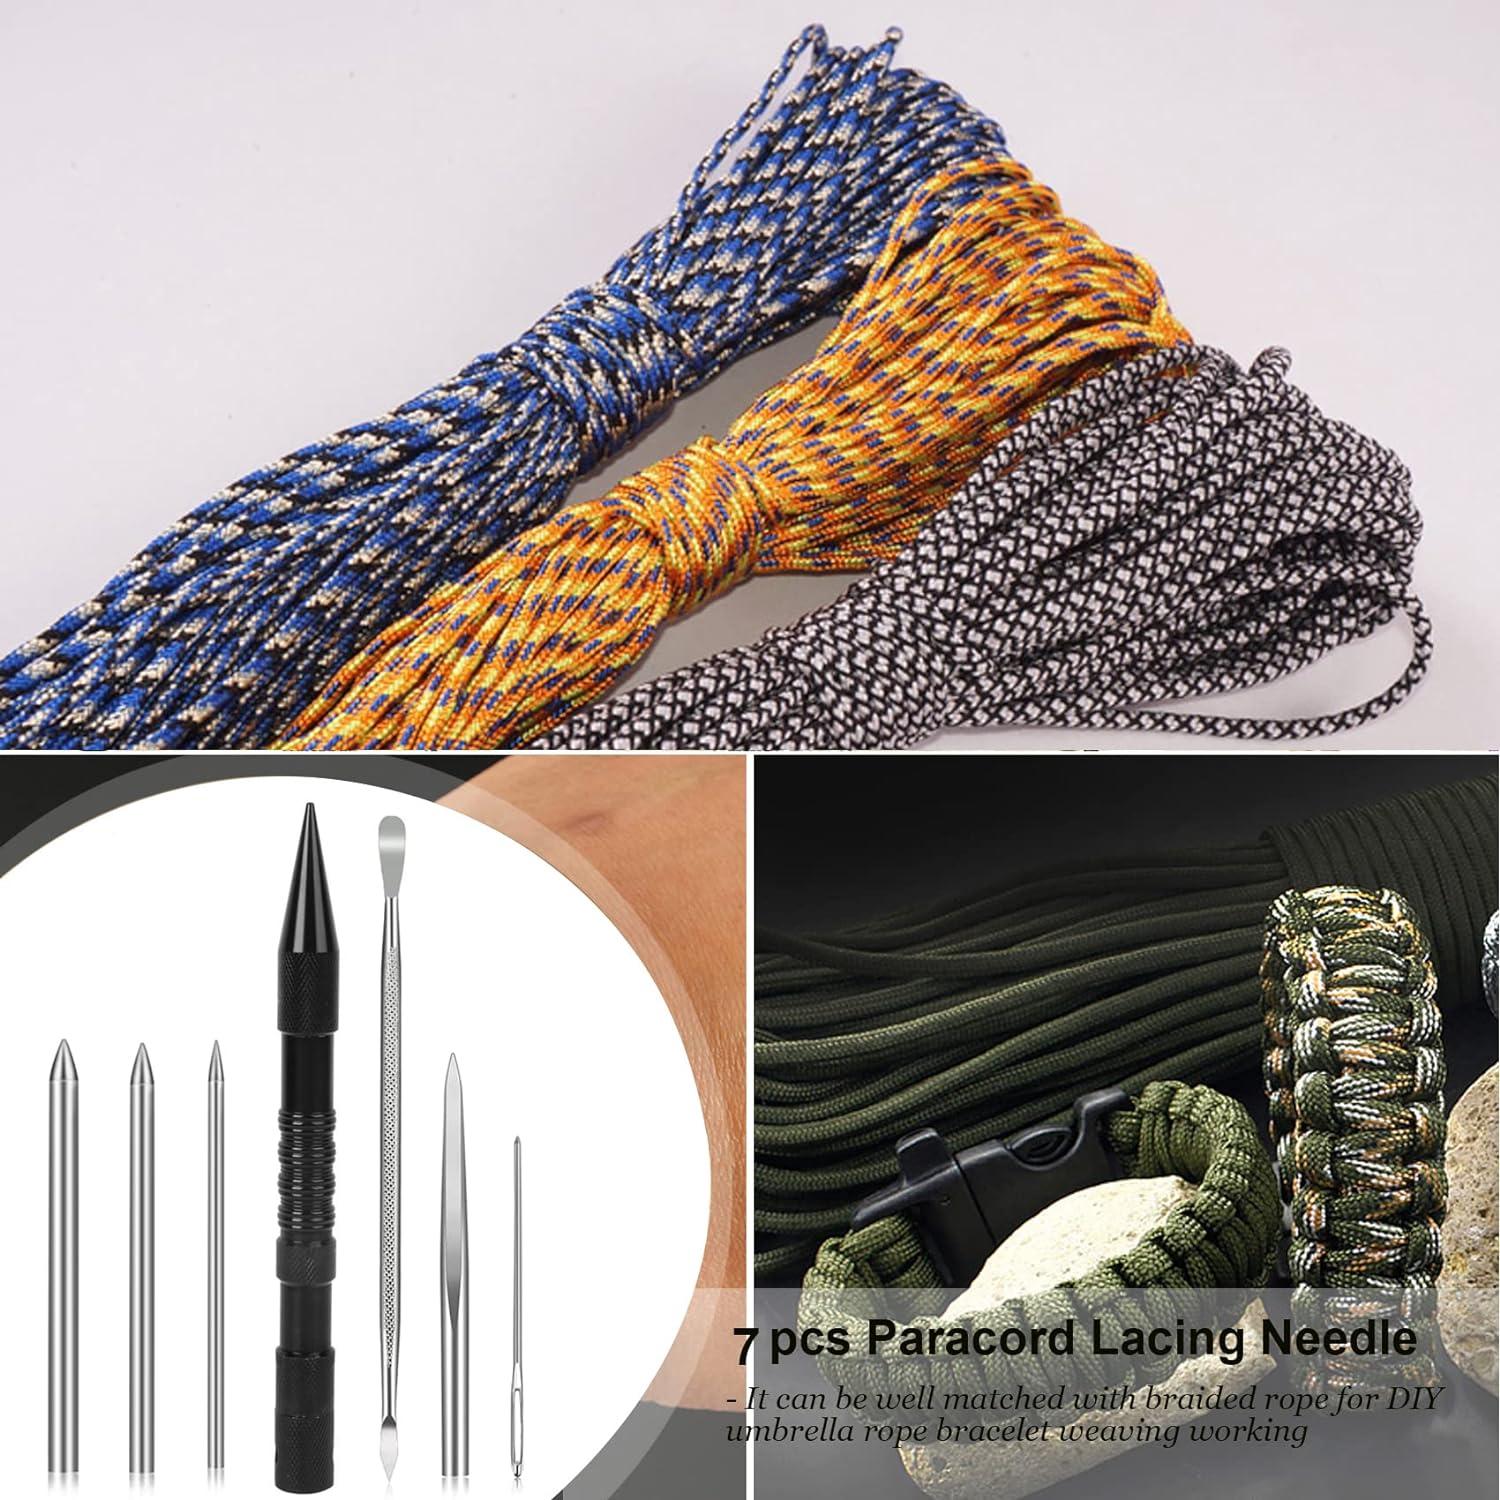 Muye 7 Pack Marlin Spike Paracord Stitching Kit with 5pcs Lacing Needles  and Smoothing Tool for Laces Strings Leather Weaving and Paracord Bracelet  with Storage